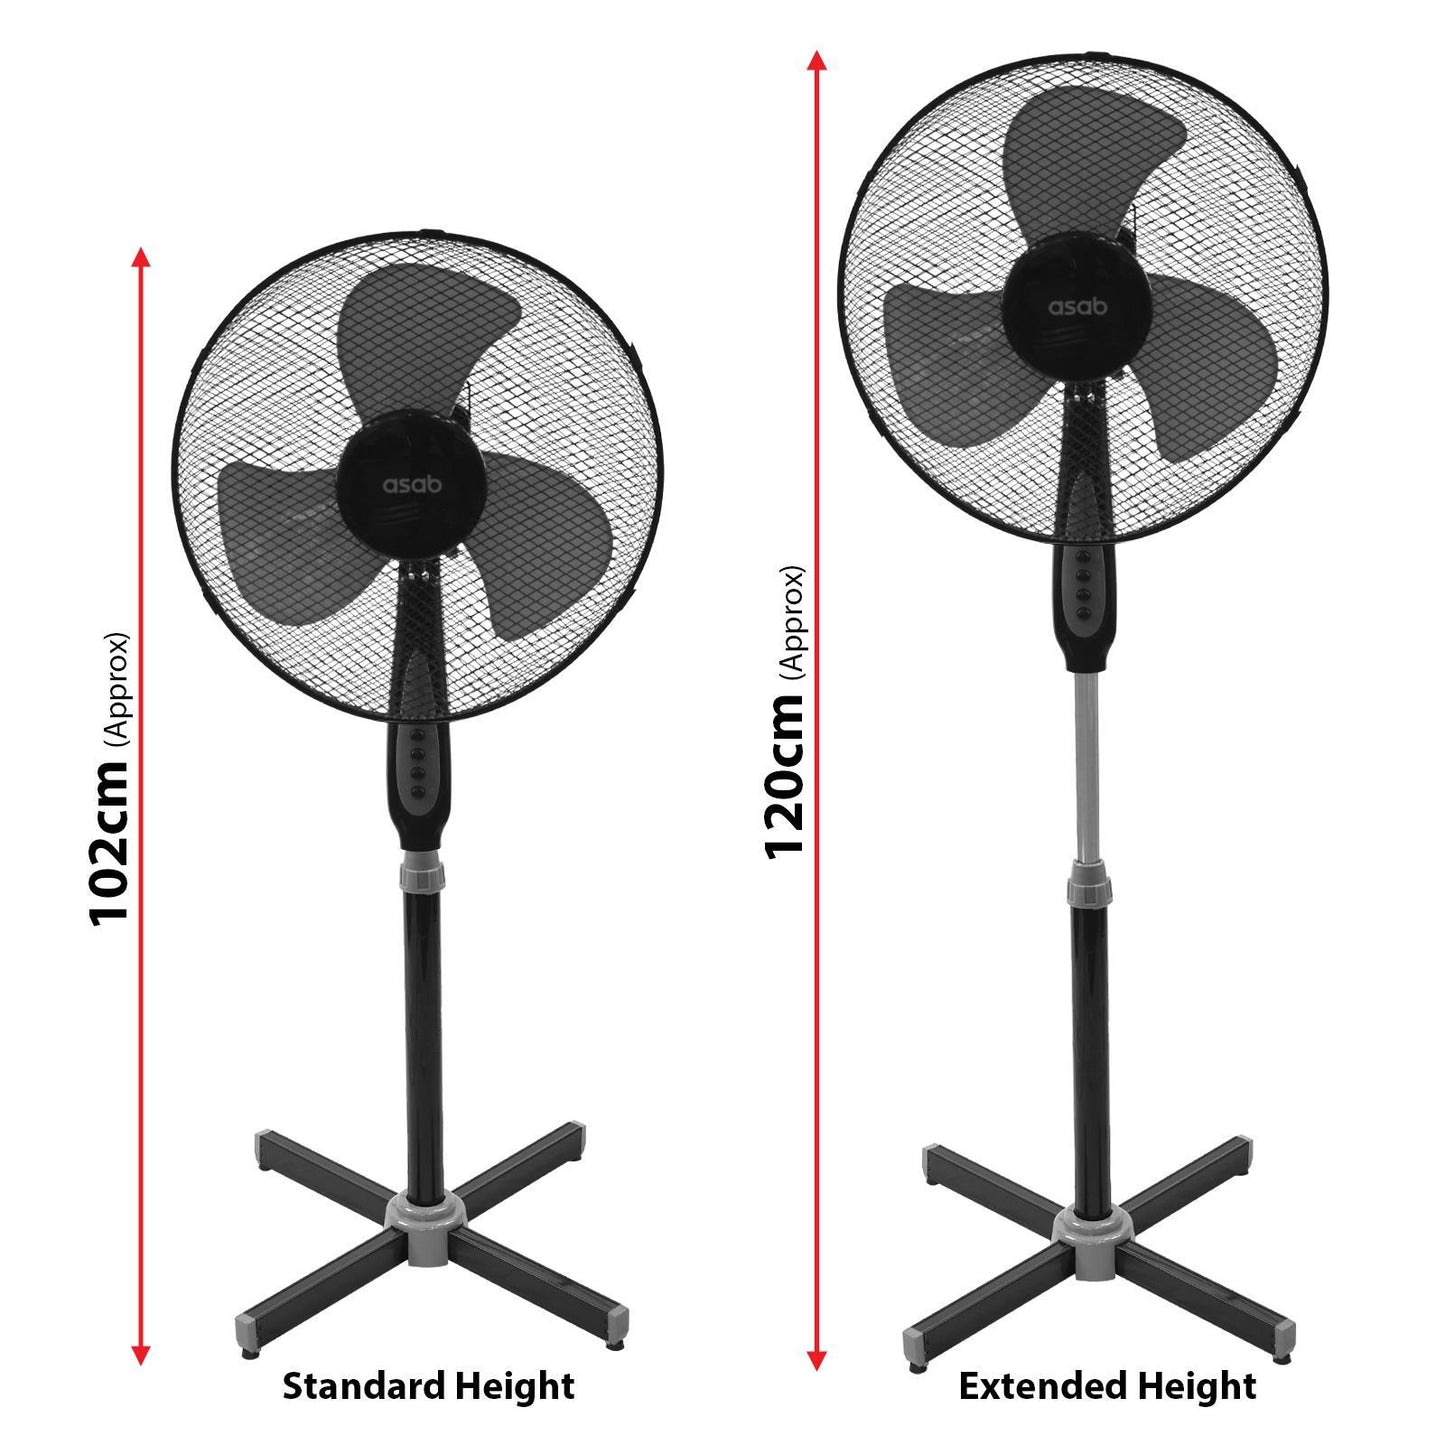 16 Inch Electric Oscillating Pedestal Fan For Standing Floor With Cooling Feature